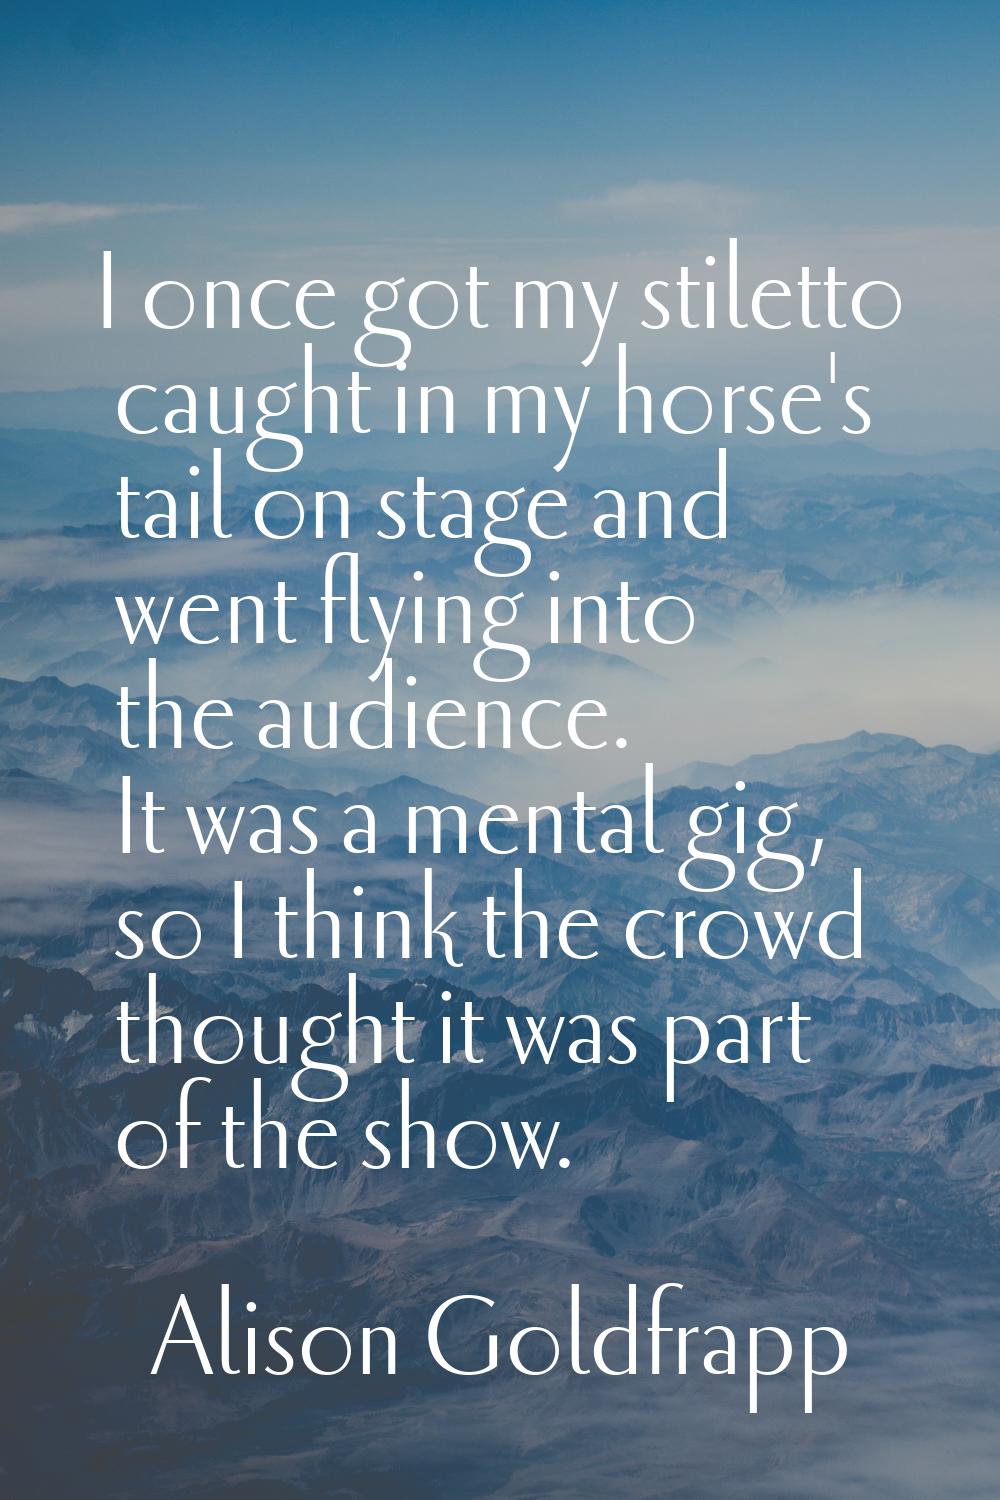 I once got my stiletto caught in my horse's tail on stage and went flying into the audience. It was